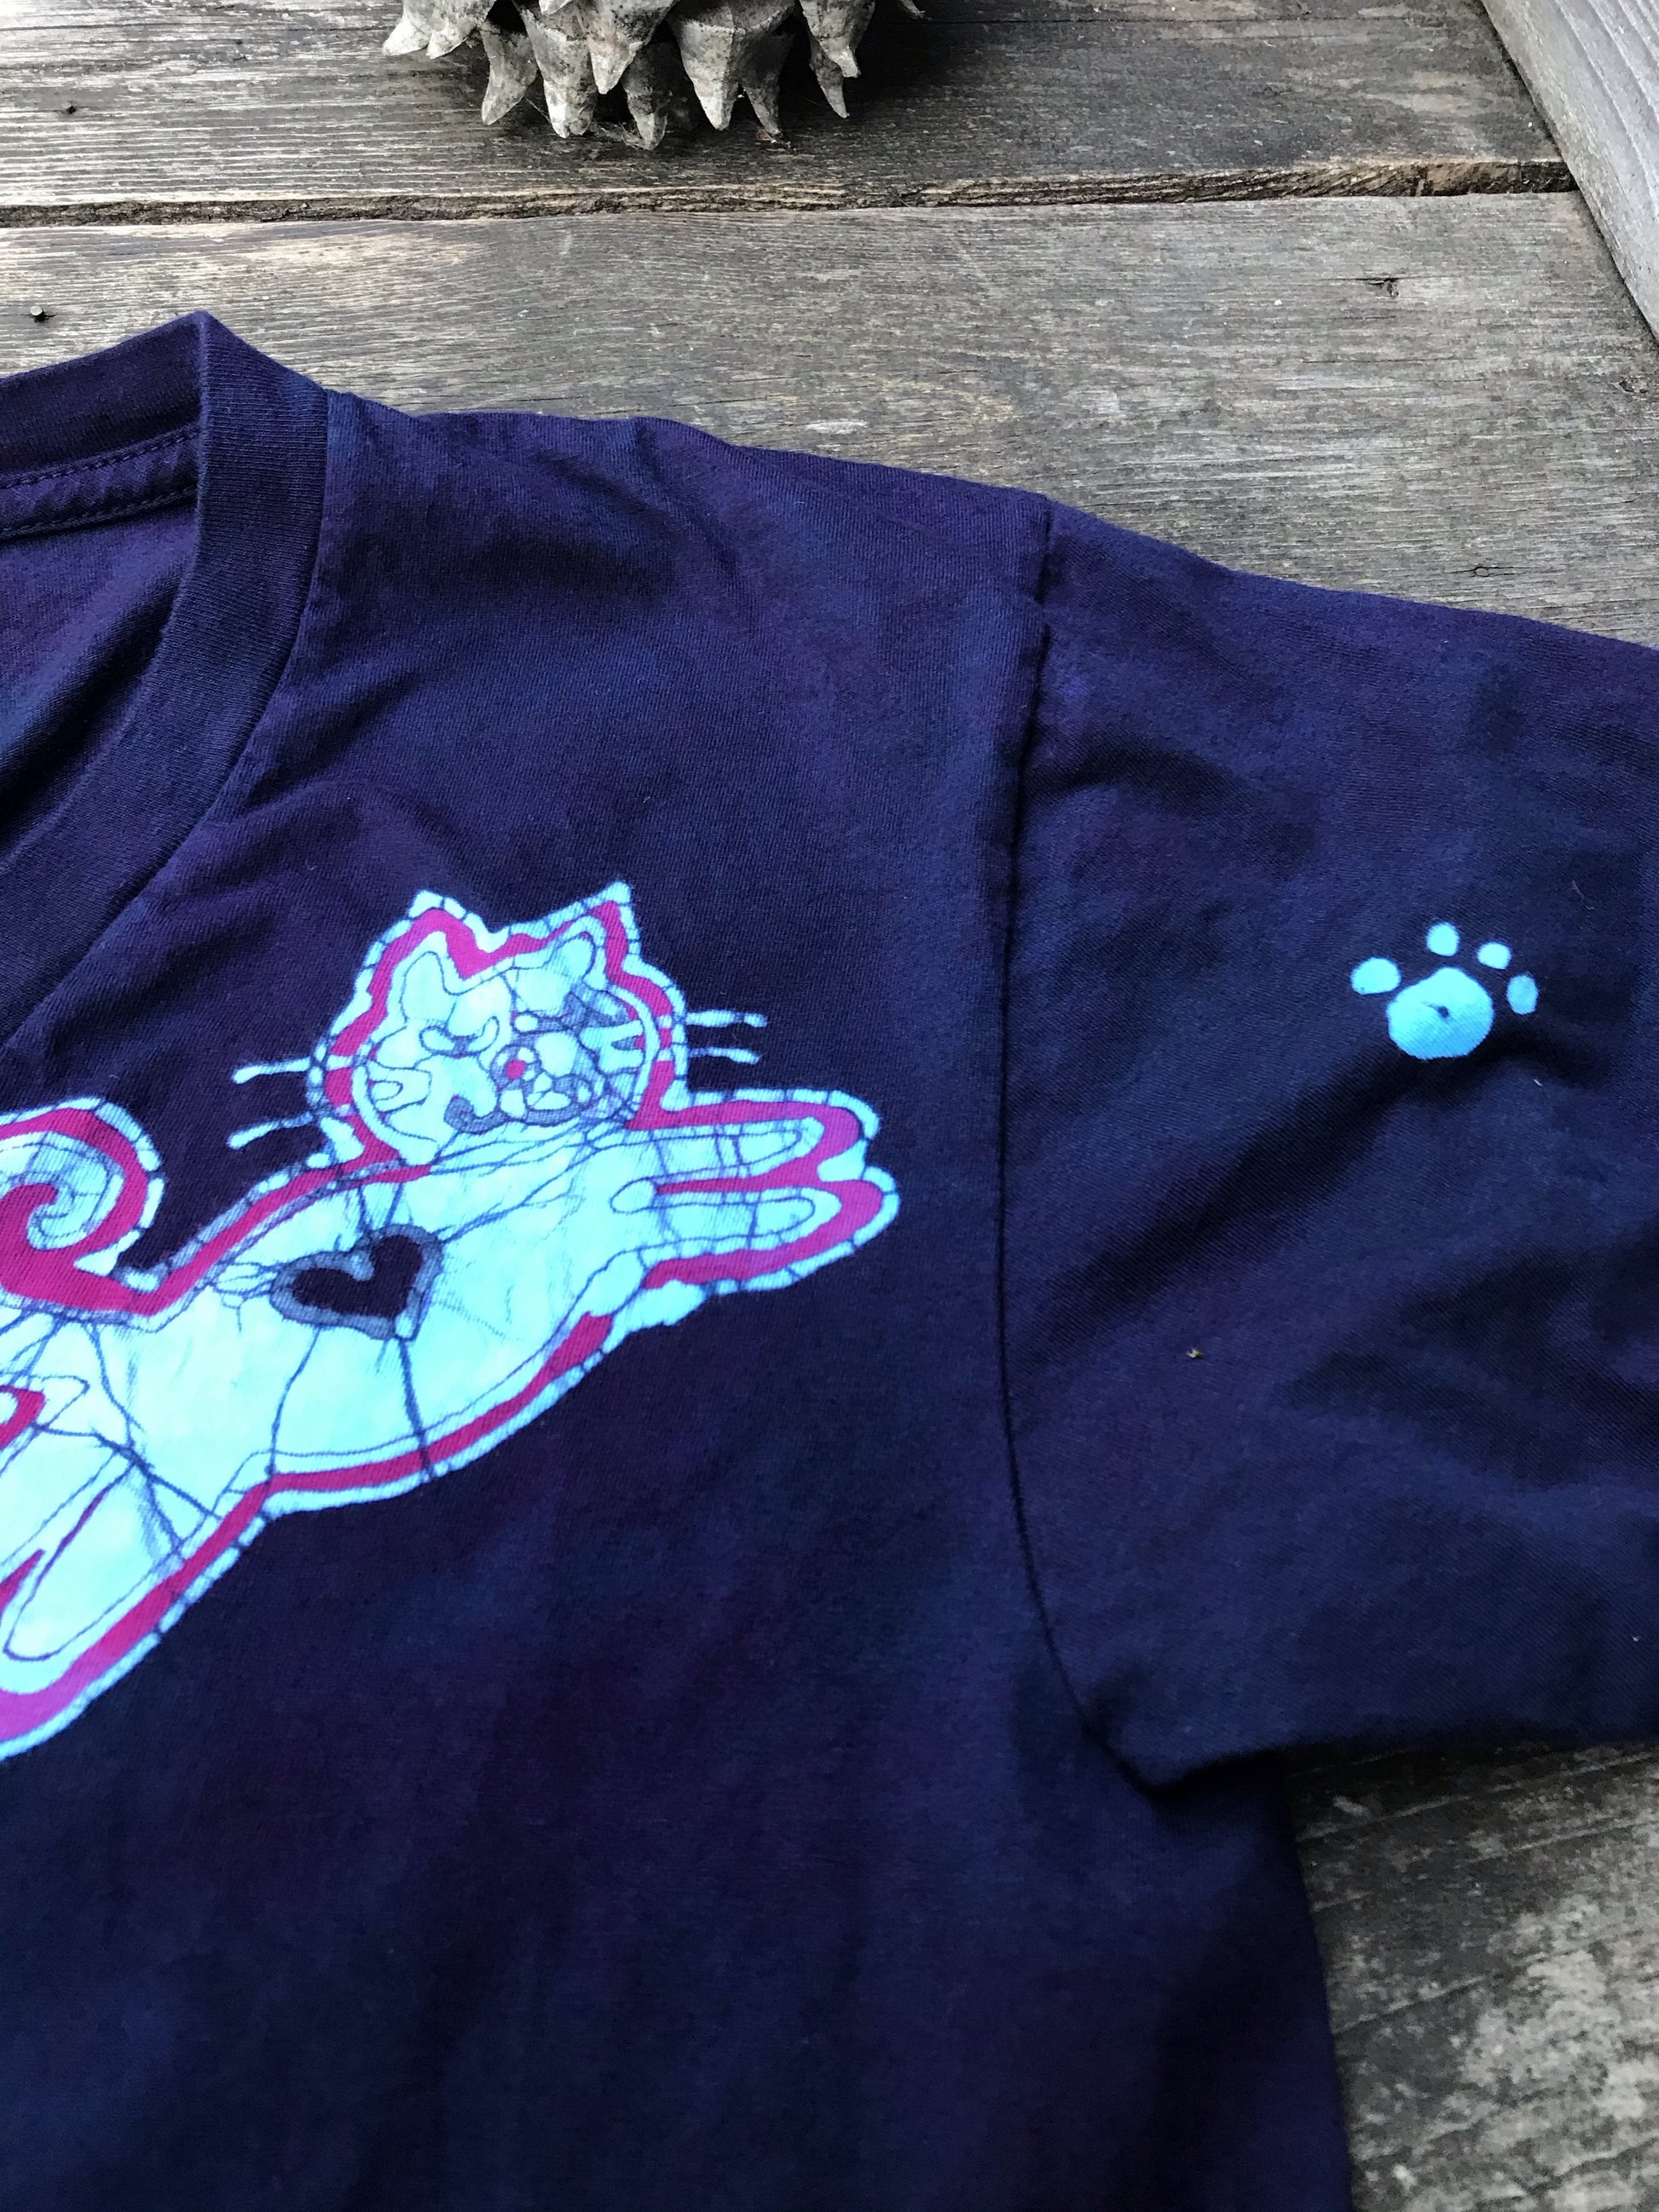 Cats So Cute Vneck Tee in The Deepest Blue With Turquoise Highlights - Unisex Tshirts batikwalla 